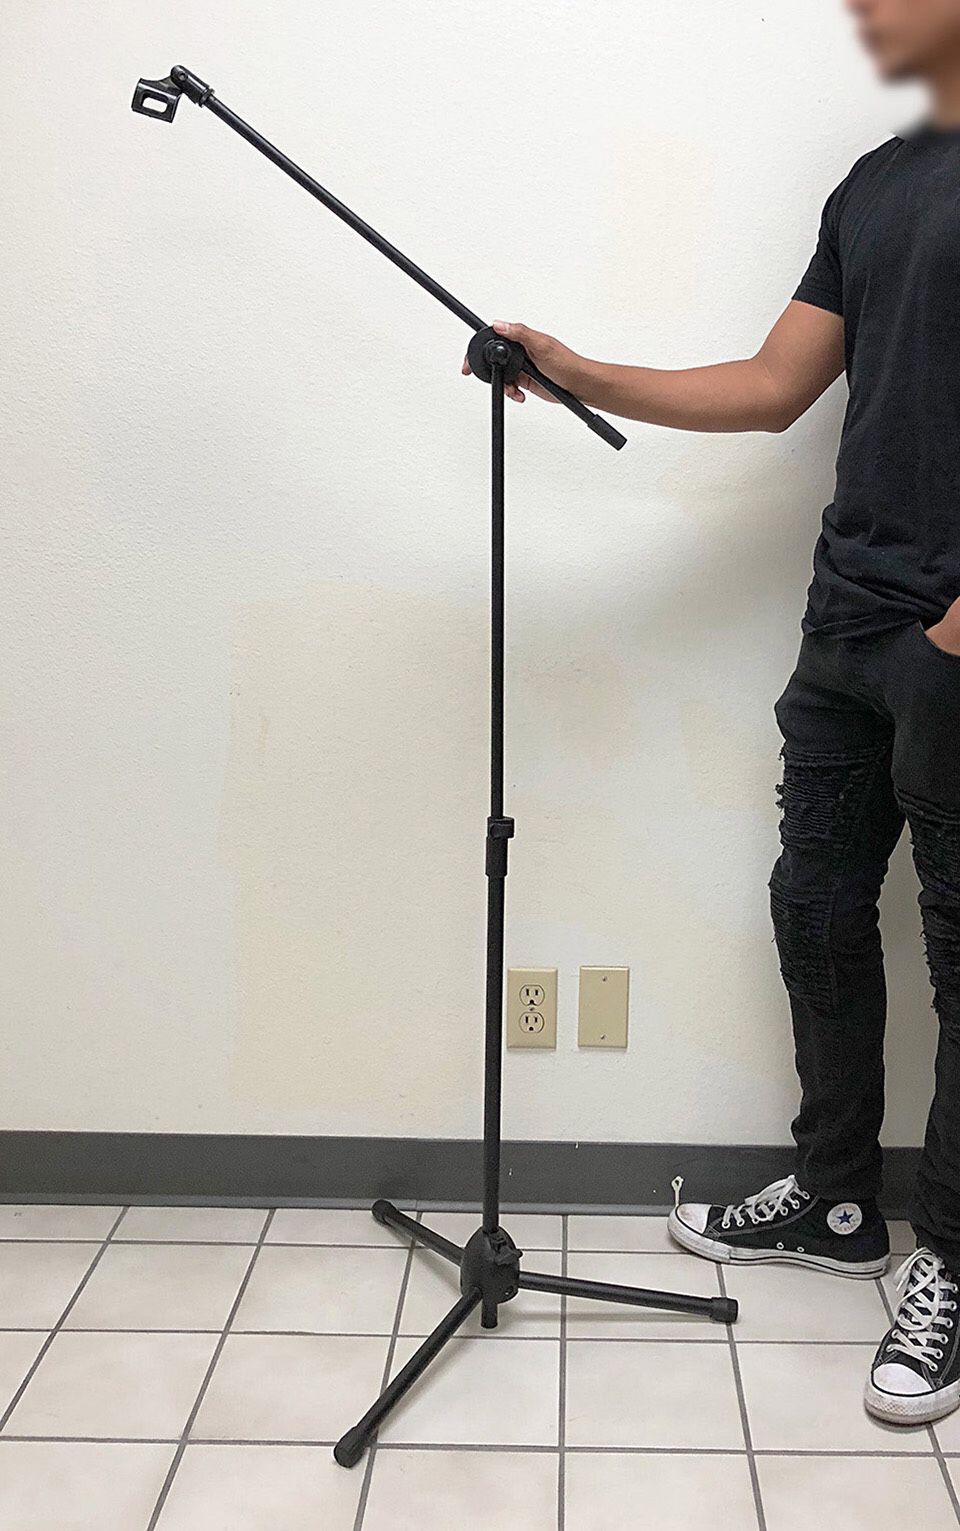 NEW $13 Microphone Boom Stand